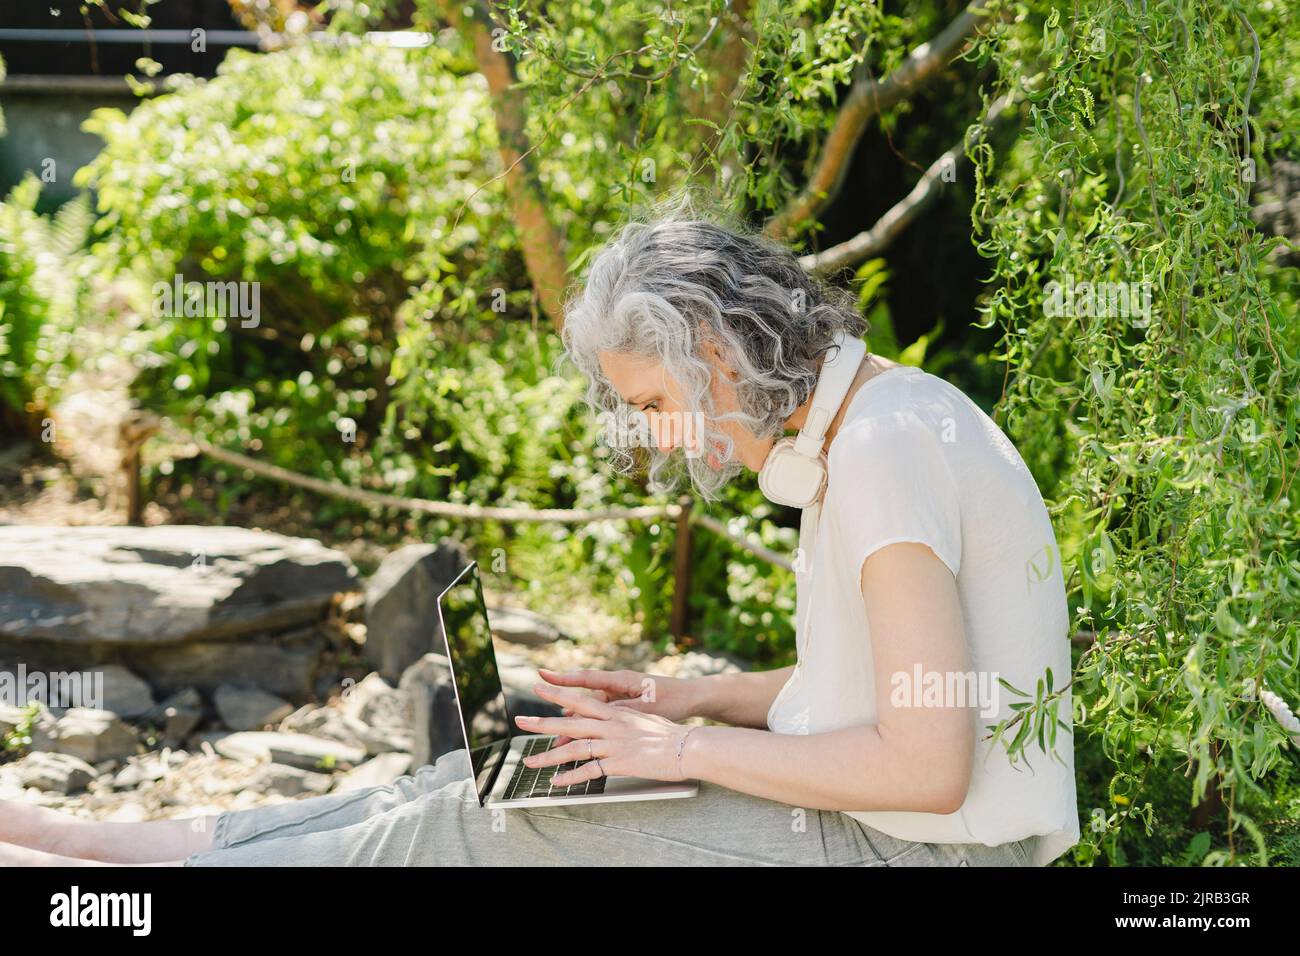 Freelancer using laptop by plants in park Stock Photo